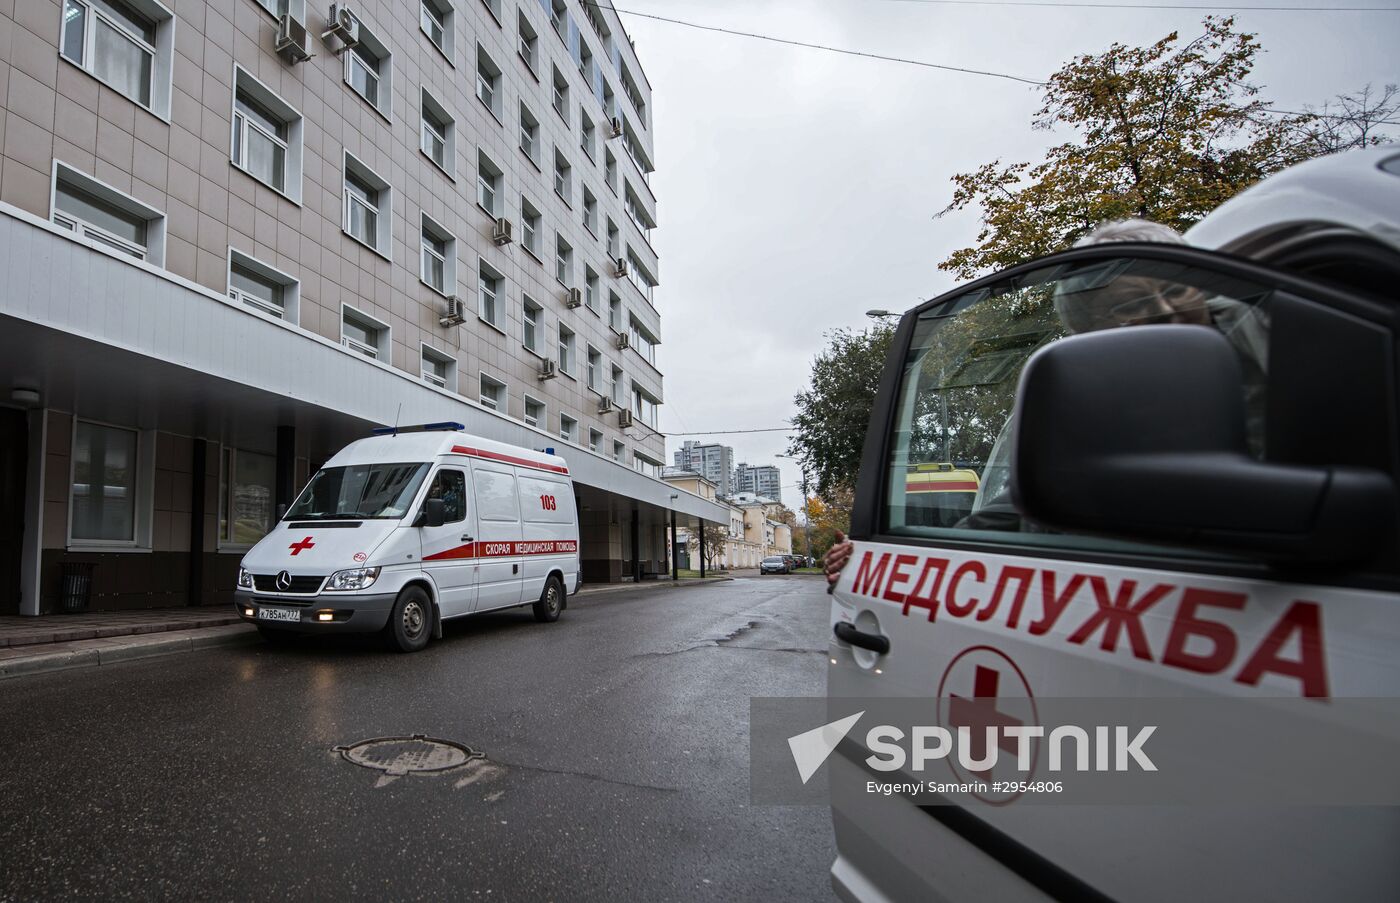 Ambulance service in Moscow